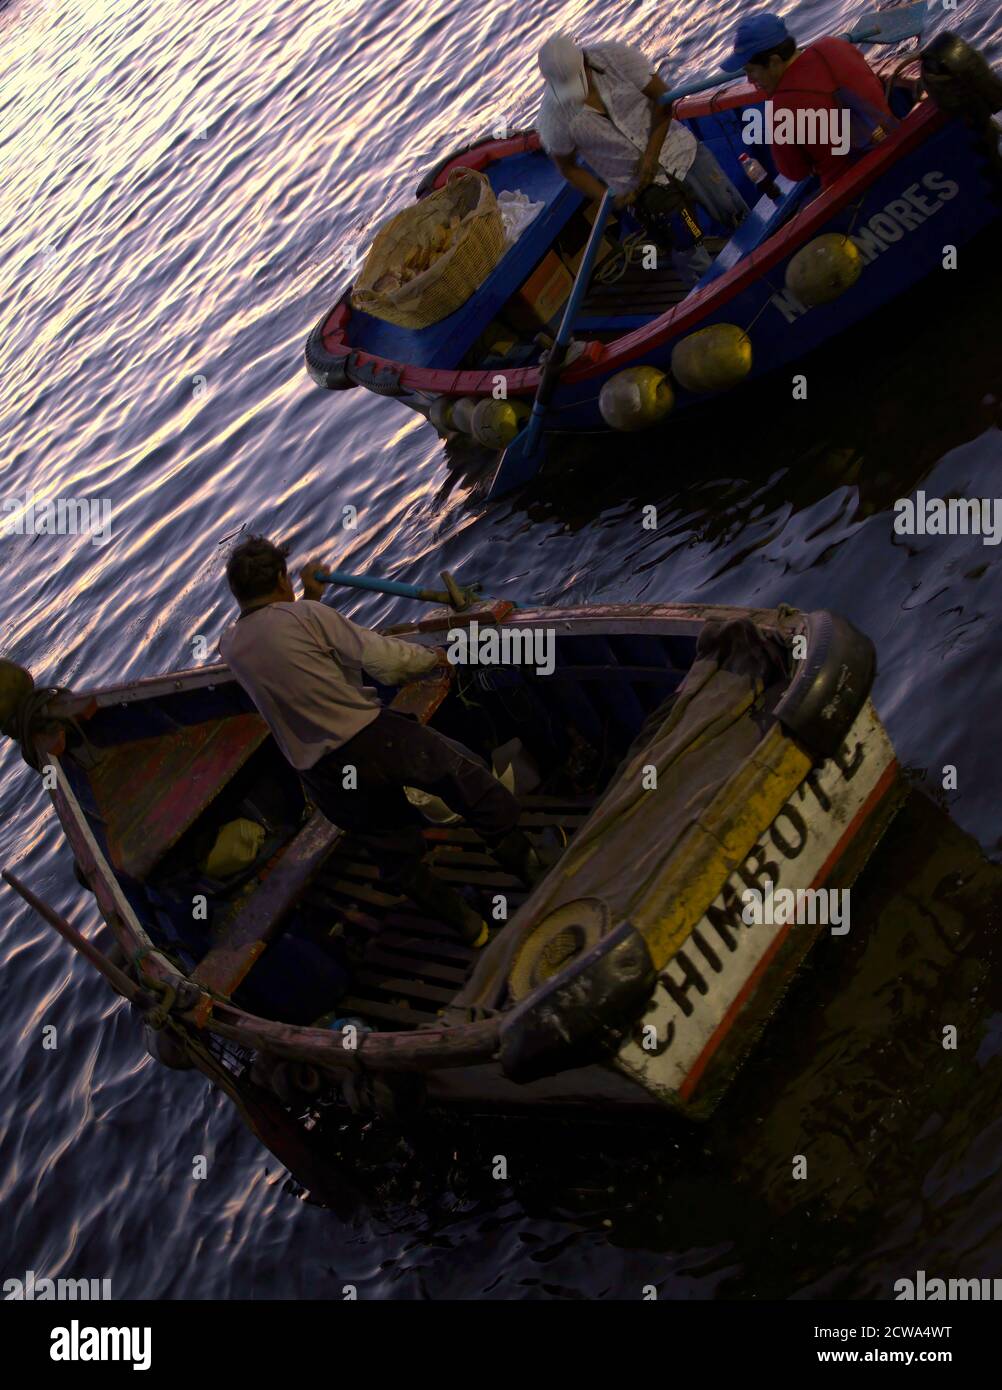 Chimbote, Peru - April 17, 2018: Men in small boats preparing to transfer to trawlers for night fishing on trawlers with trawlers and mountains in bac Stock Photo